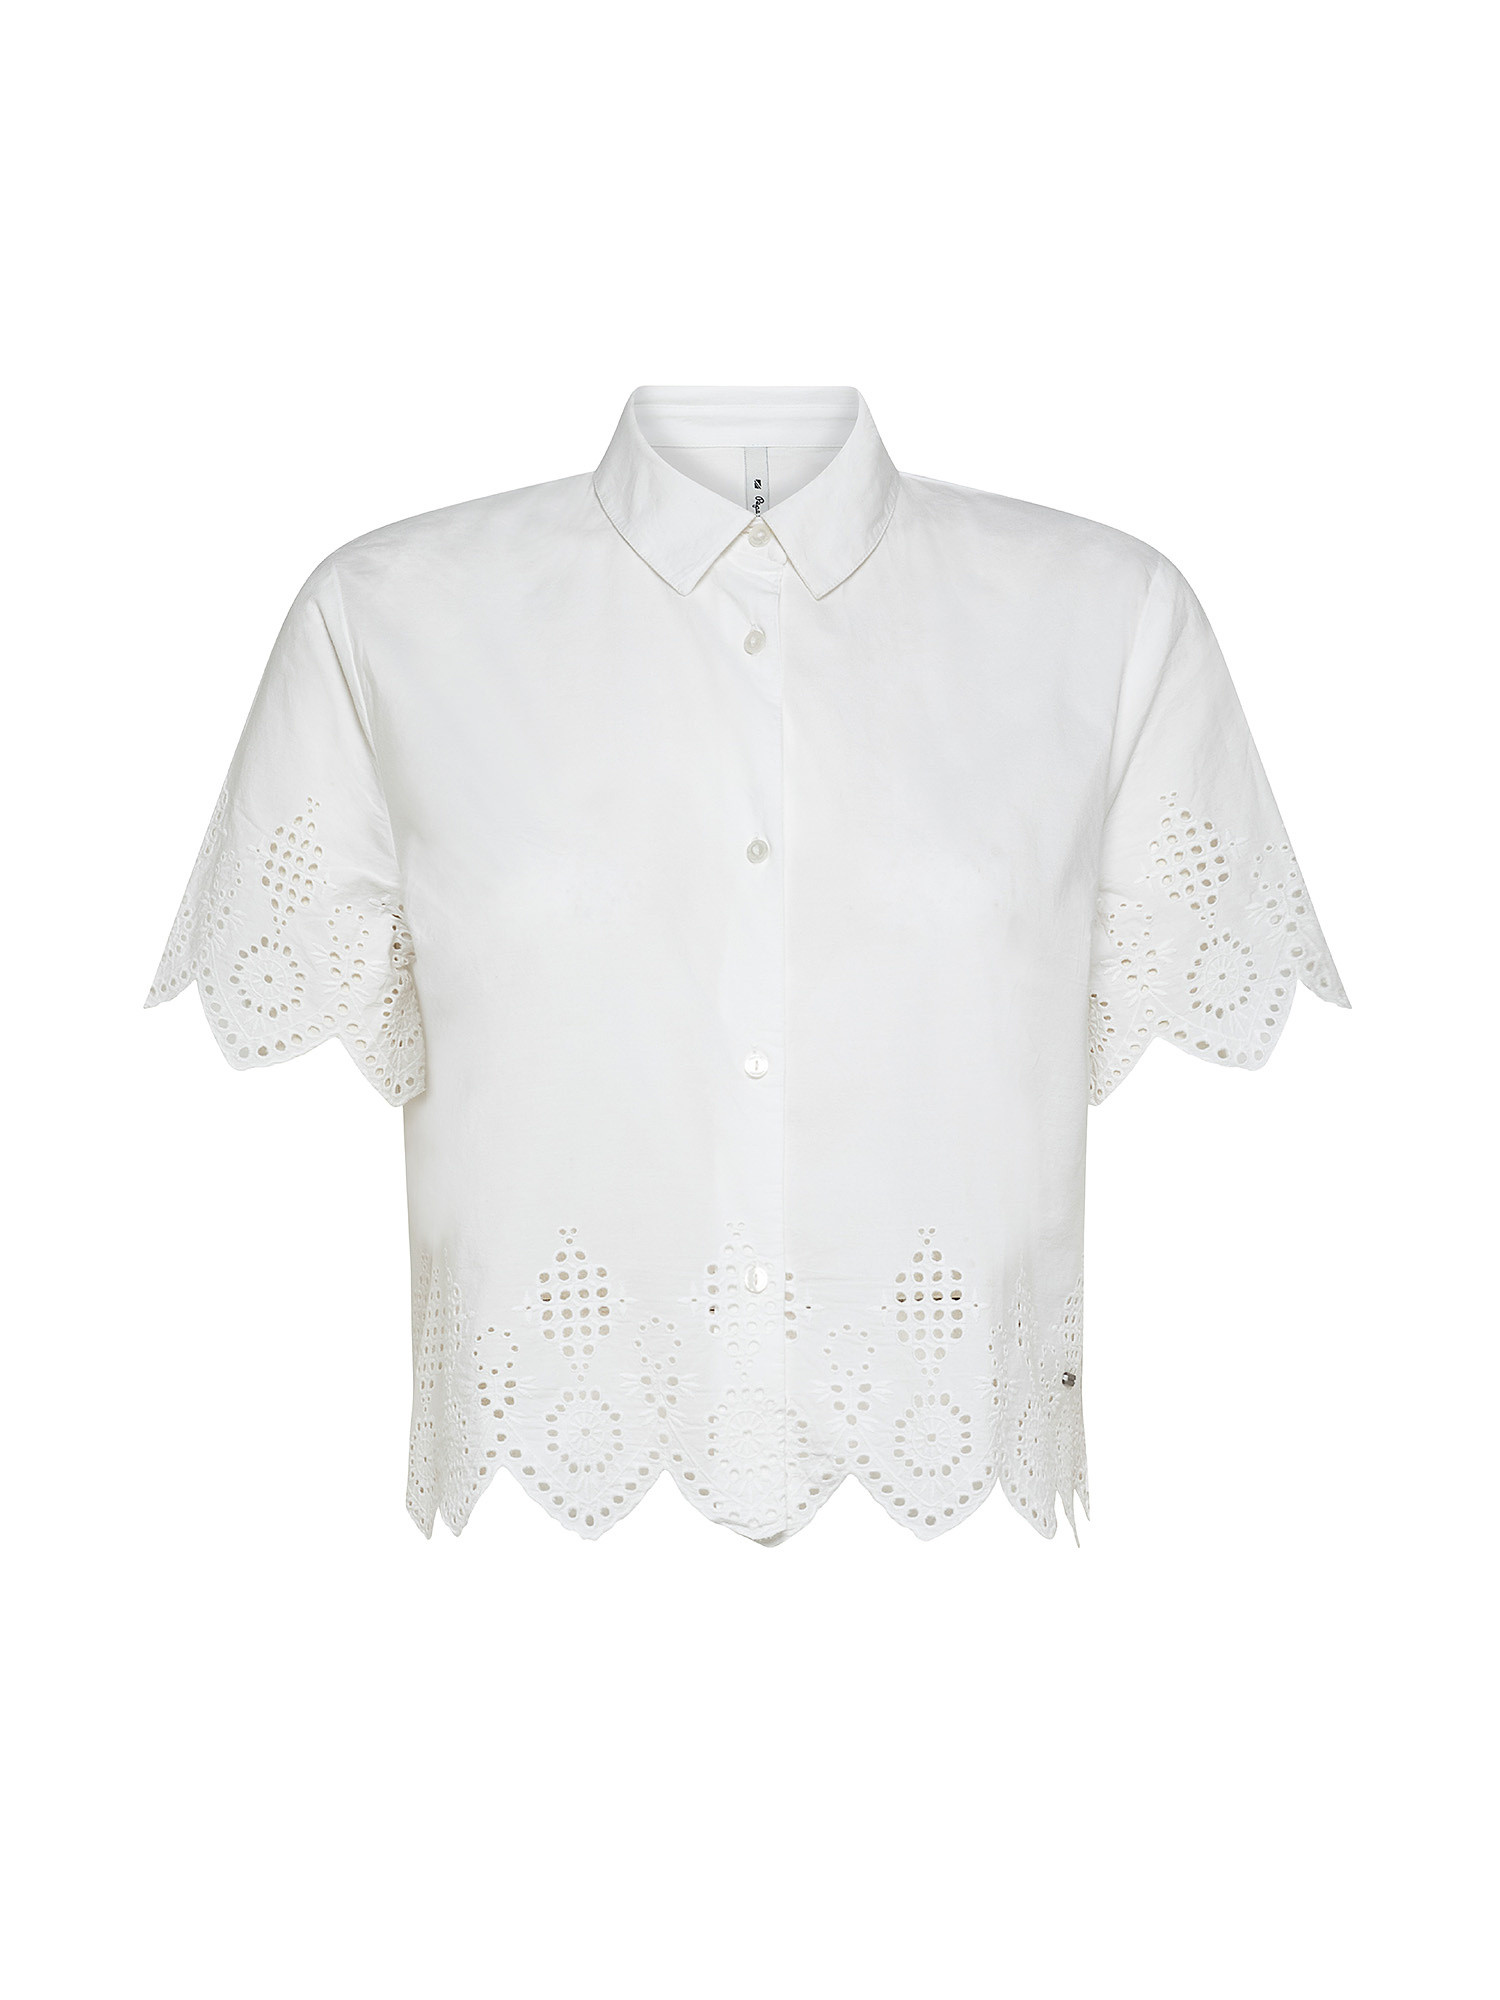 Laura openwork details shirt, White, large image number 0